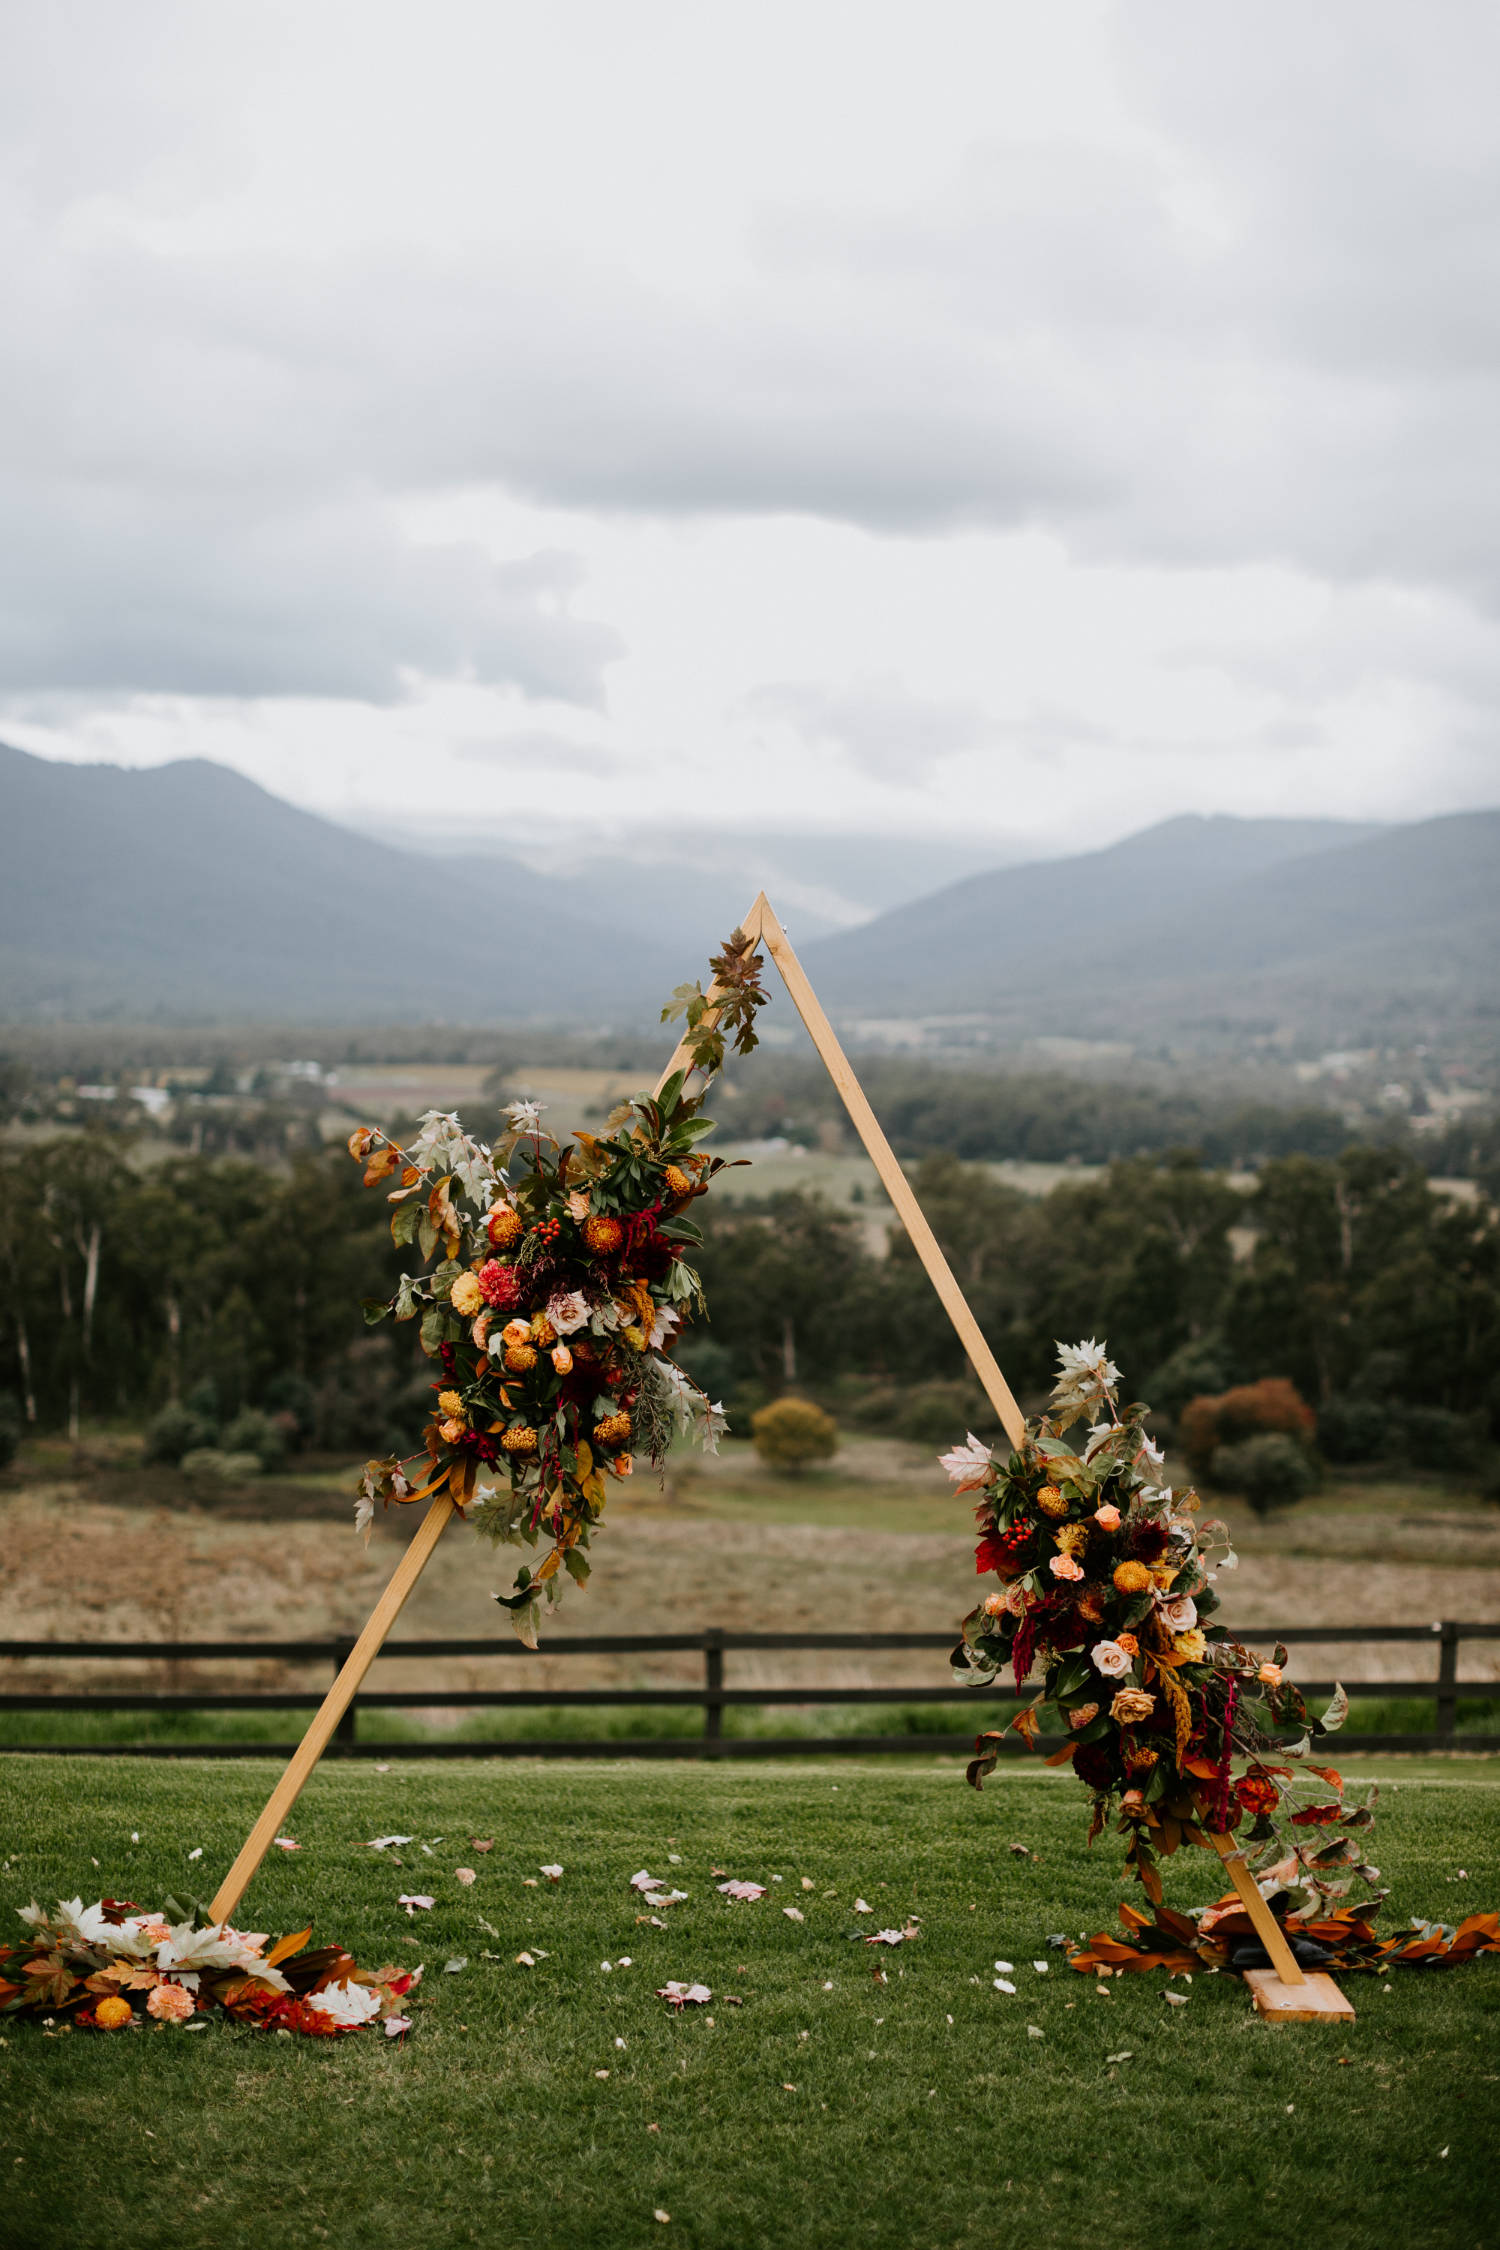 Classic elegant style for Jess and Jack at their Riverstone Estate wedding, Yarra Valley, by Dan Brannan Photography.